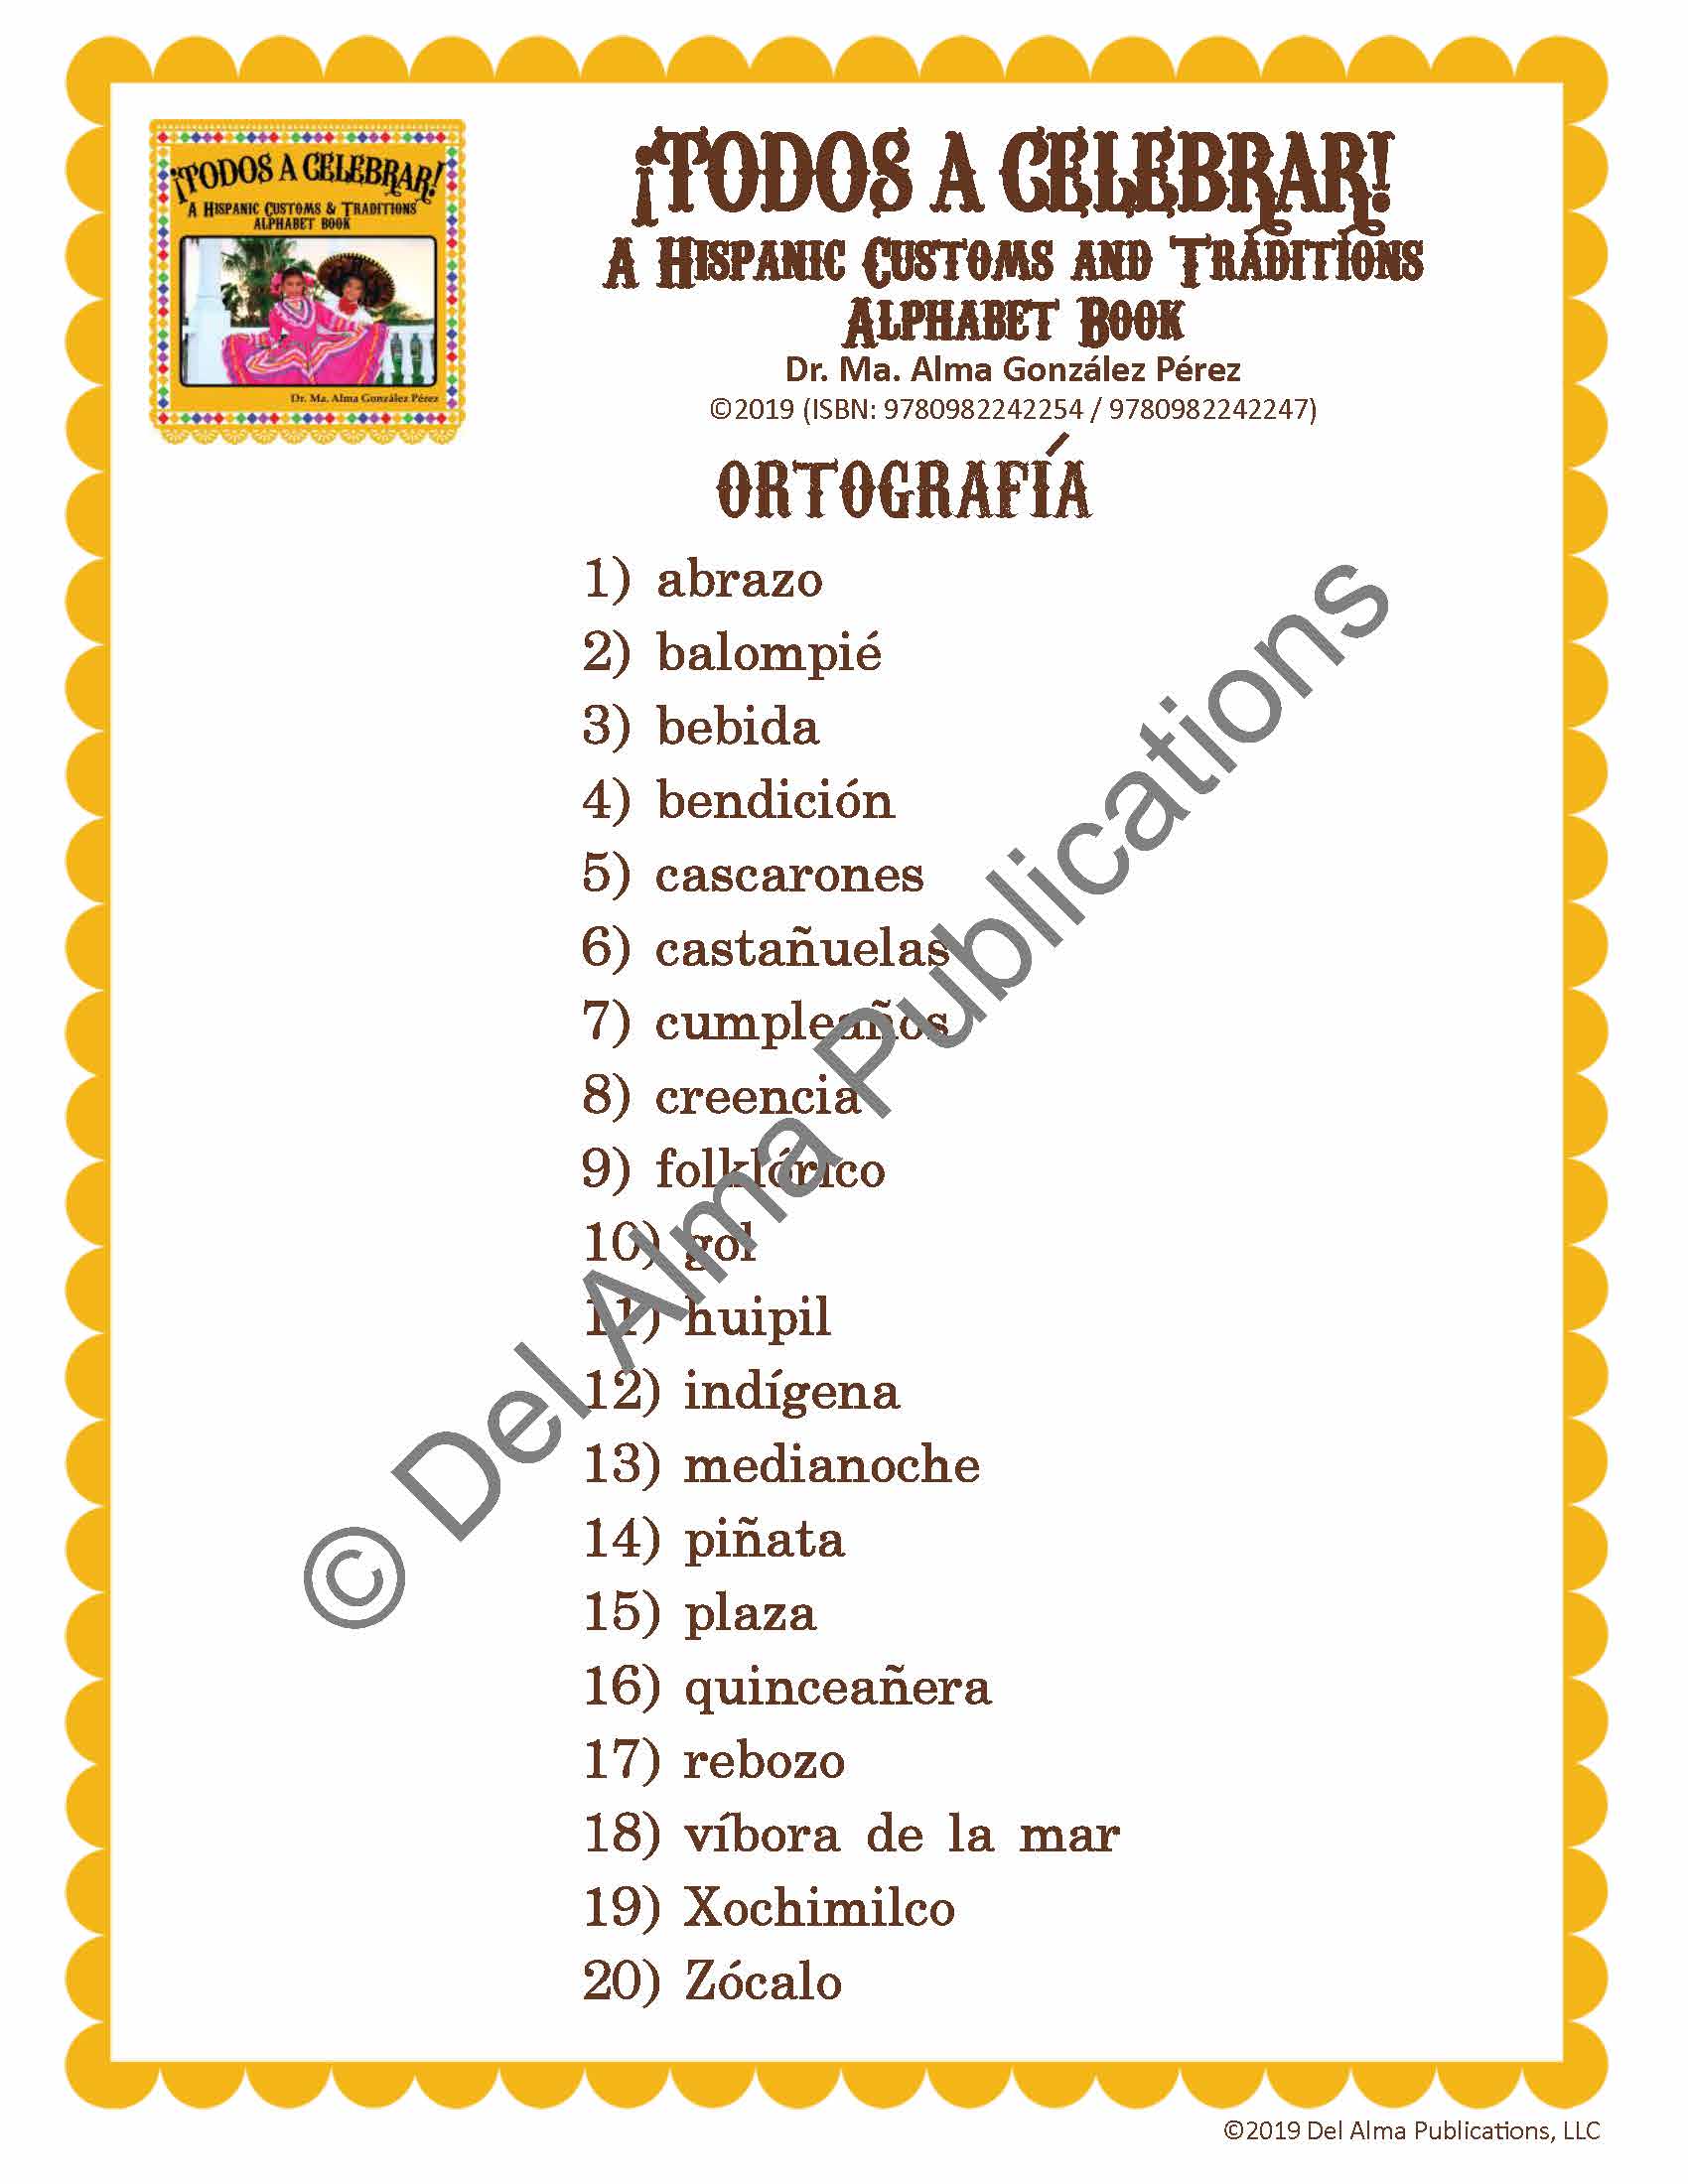 Hispanic Culture Vocabulary and Spelling Lists (Spanish)